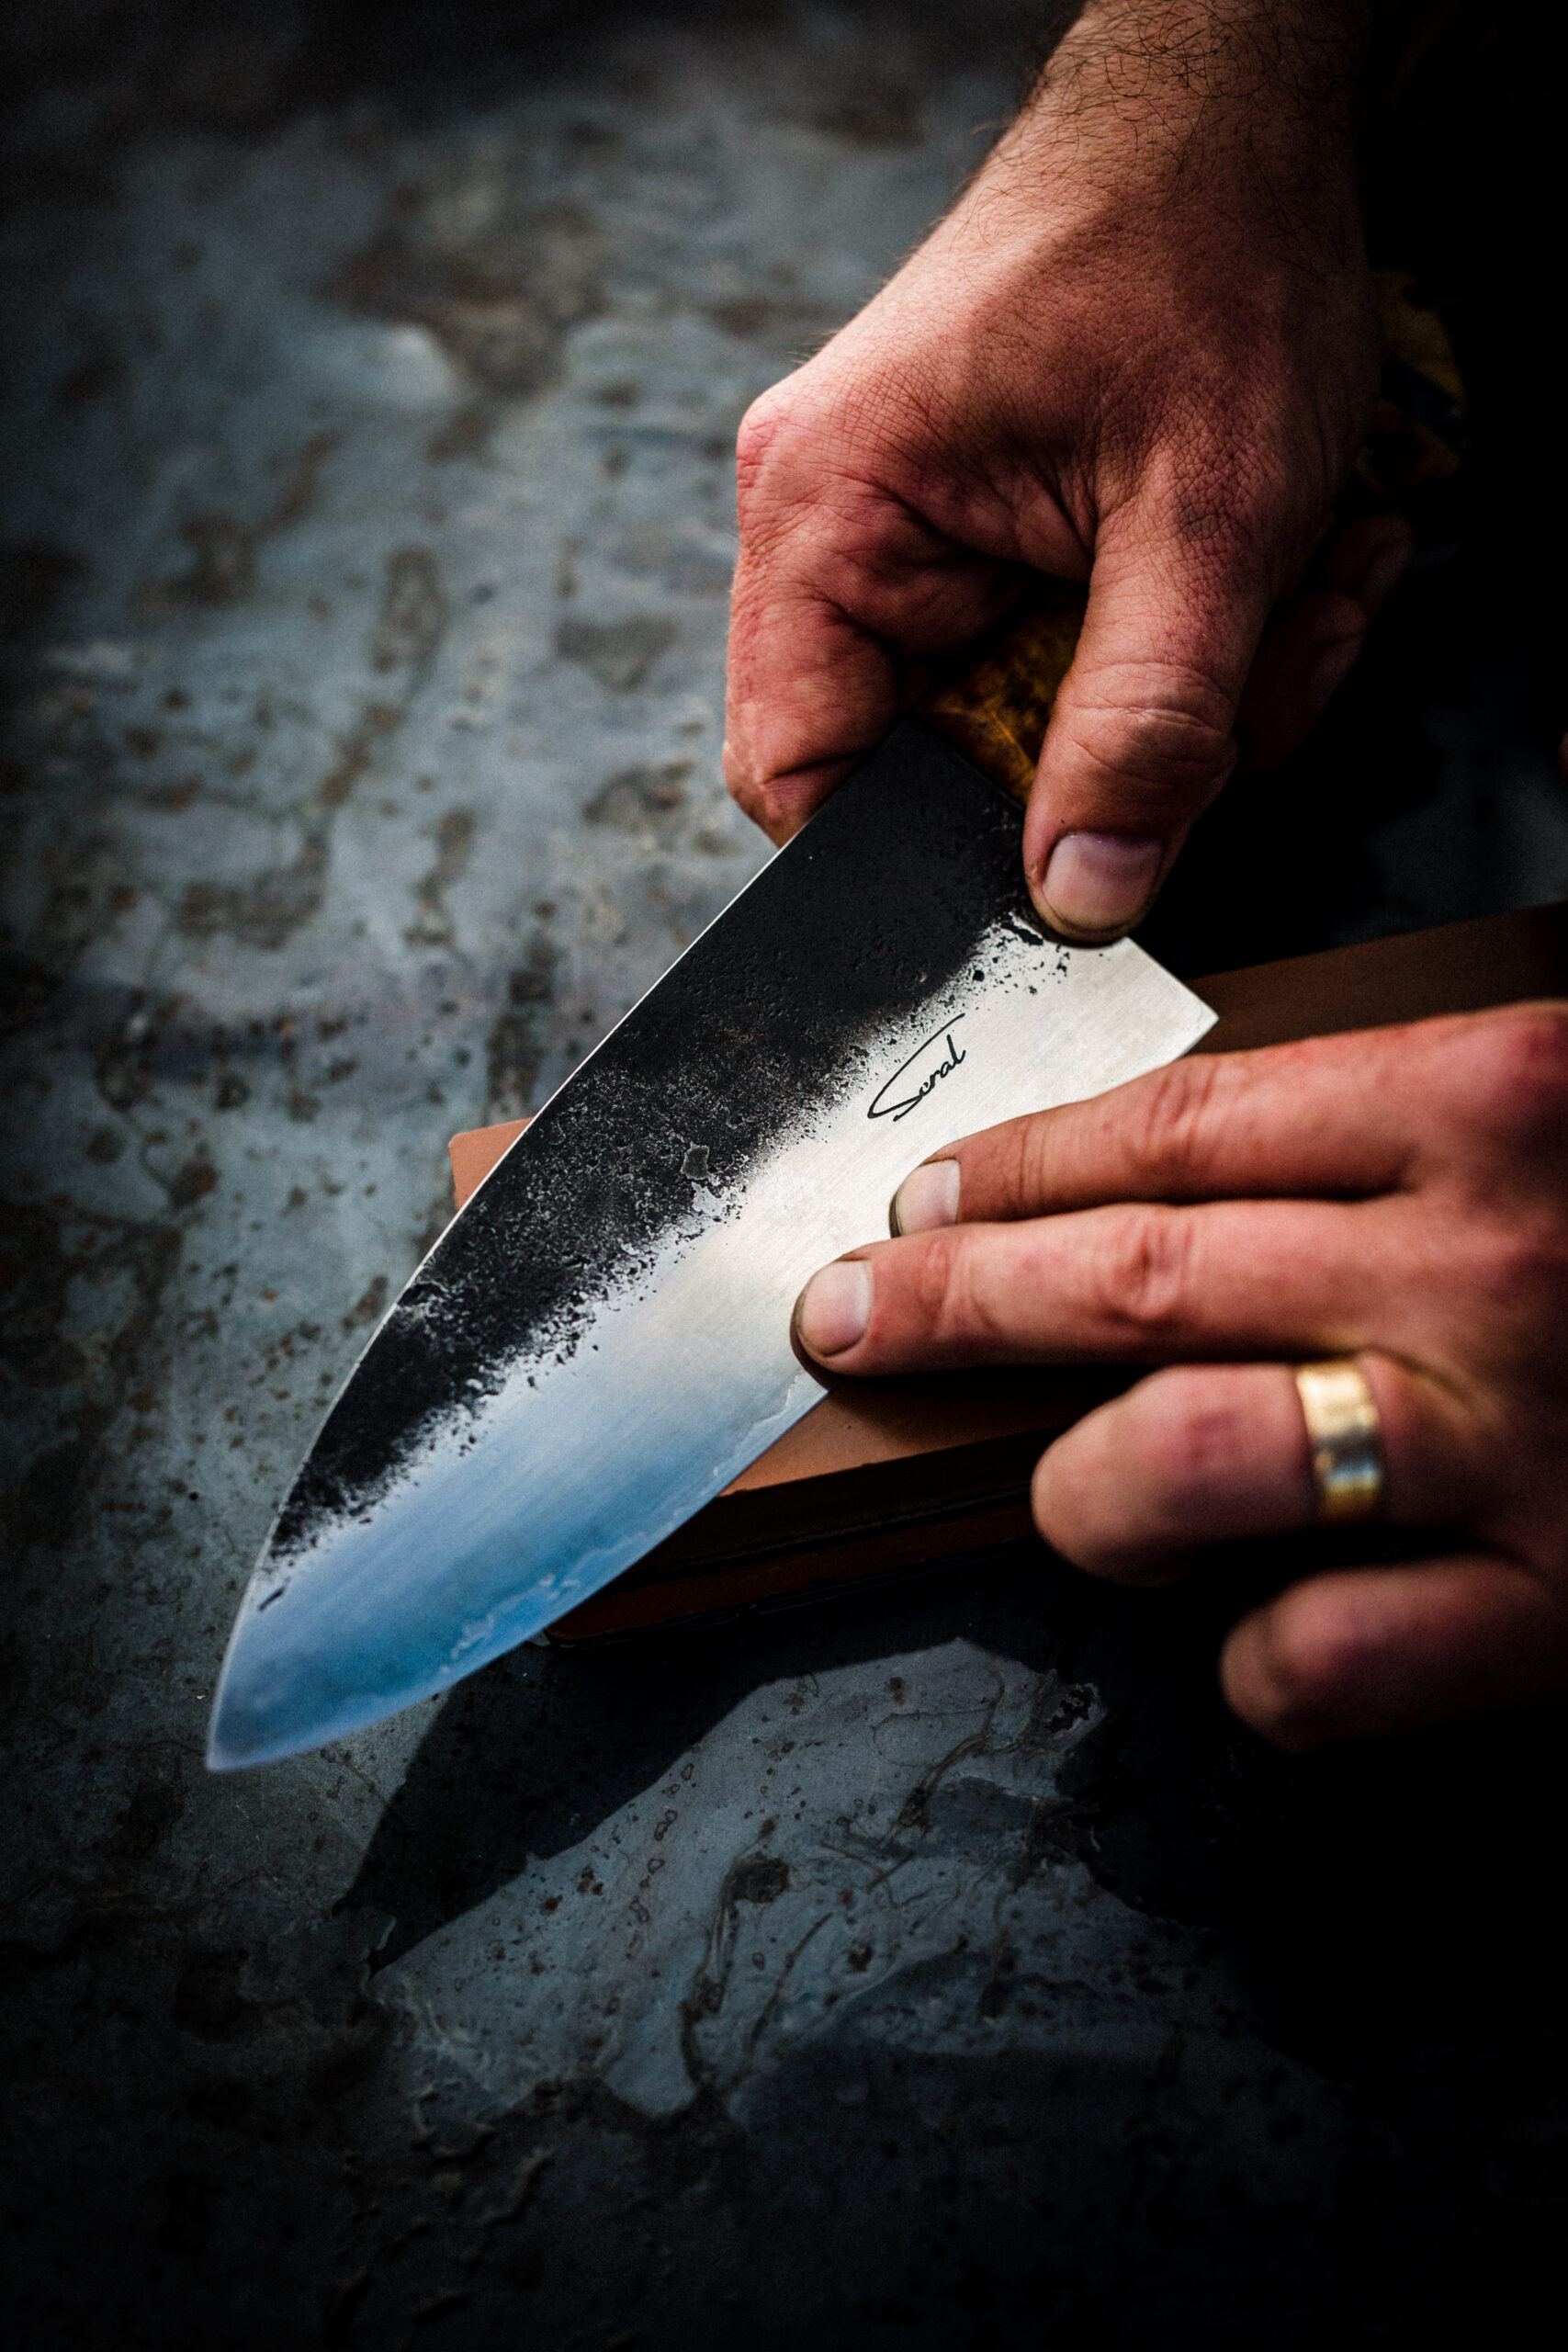 The grain on each blade comes from the fusing of two metals: a stainless steel outer “jacket” and a high-carbon core that can hold a sharp edge. (John Troxell)